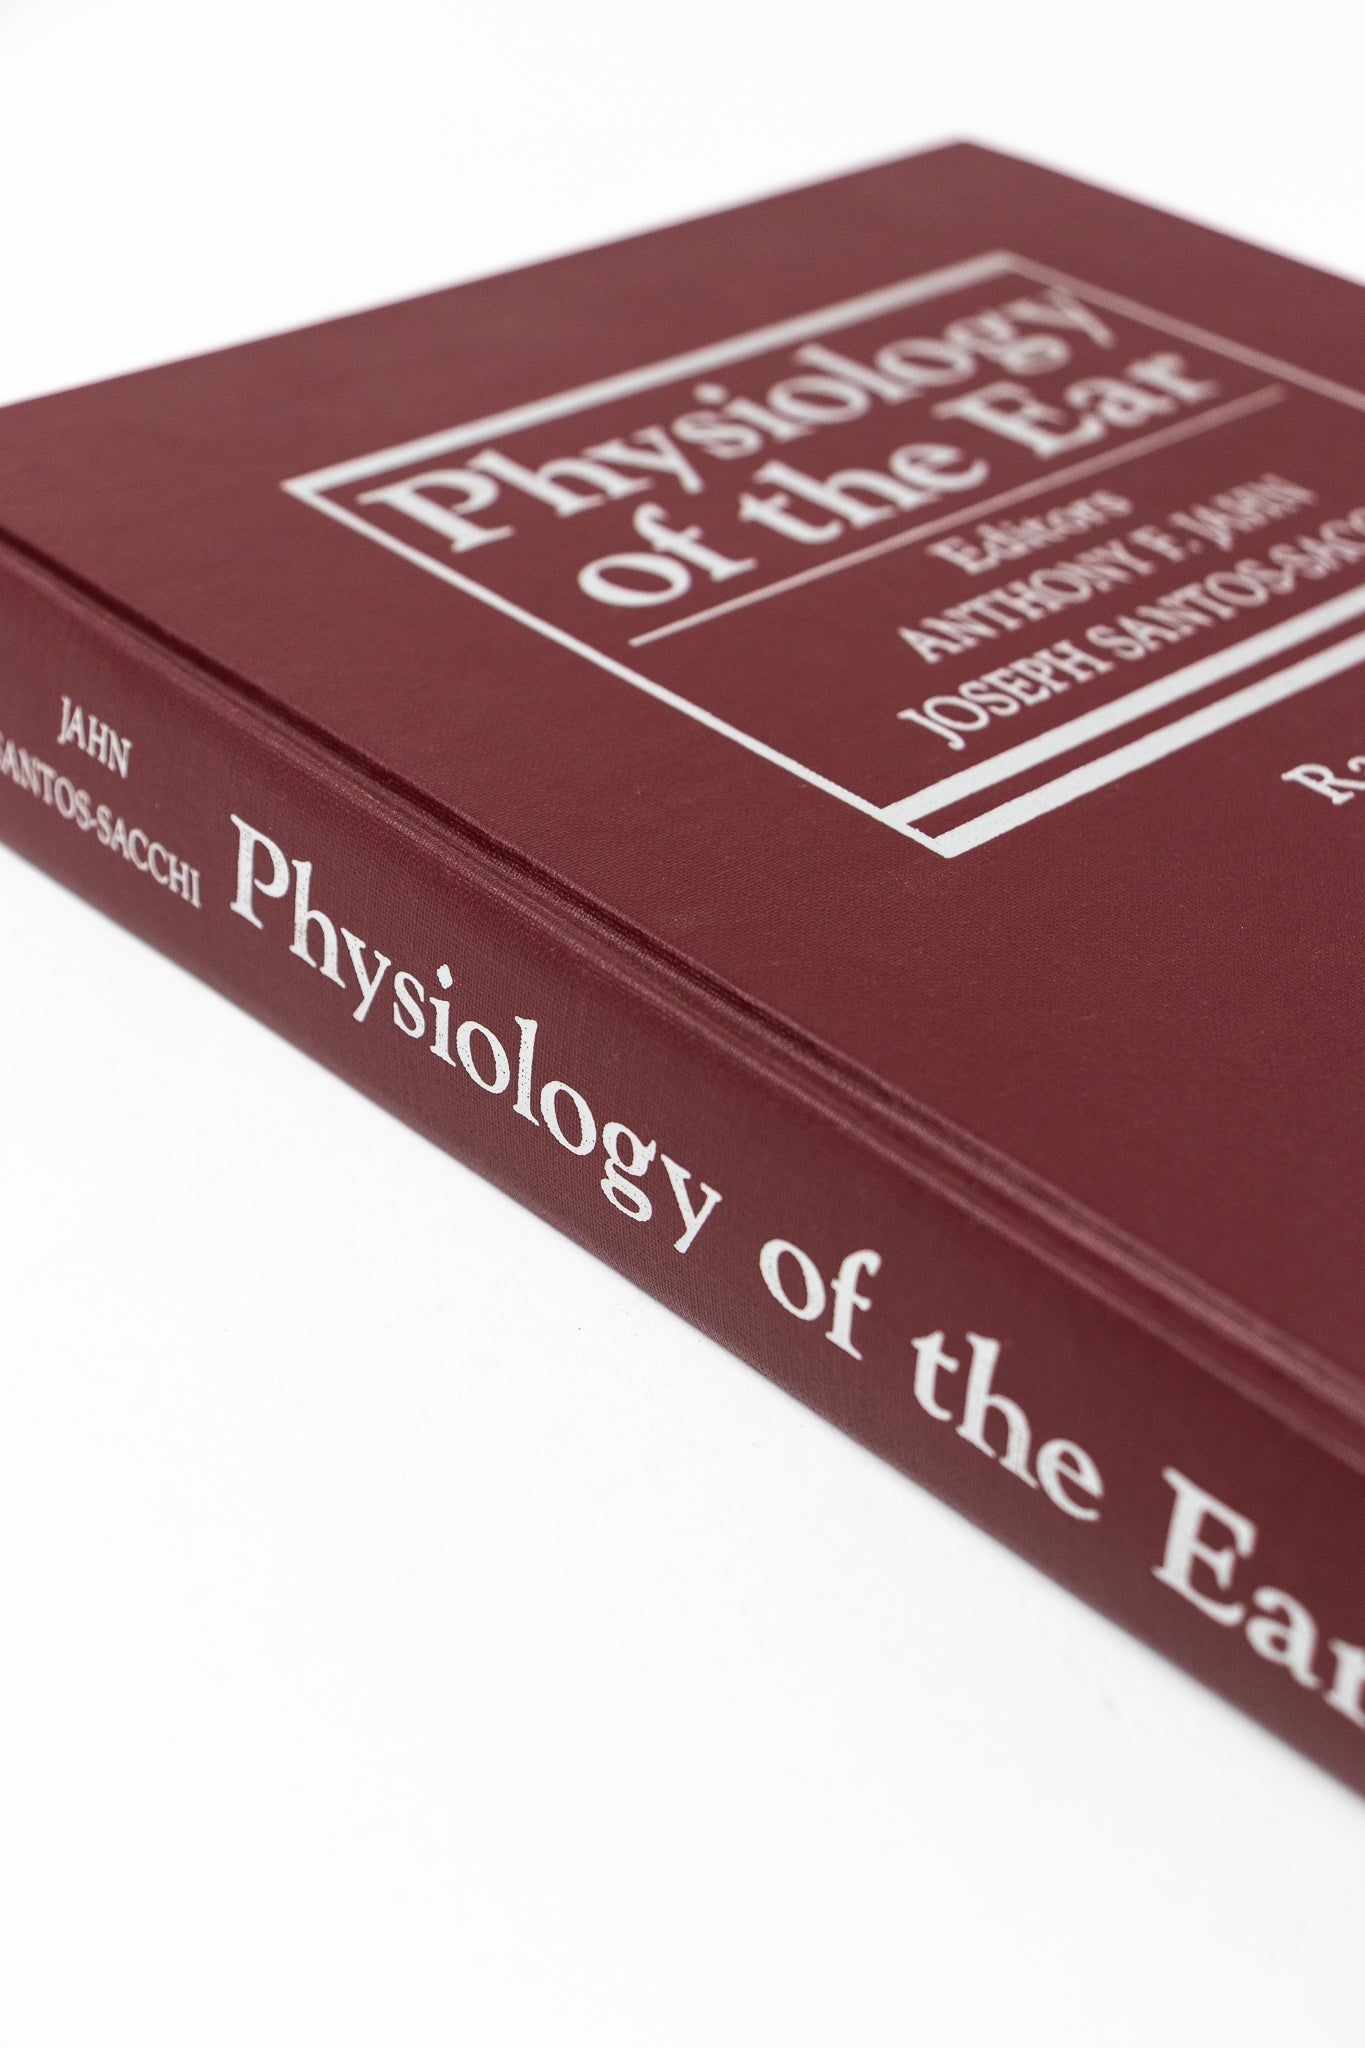 Physiology of the Ear - Stemcell Science Shop